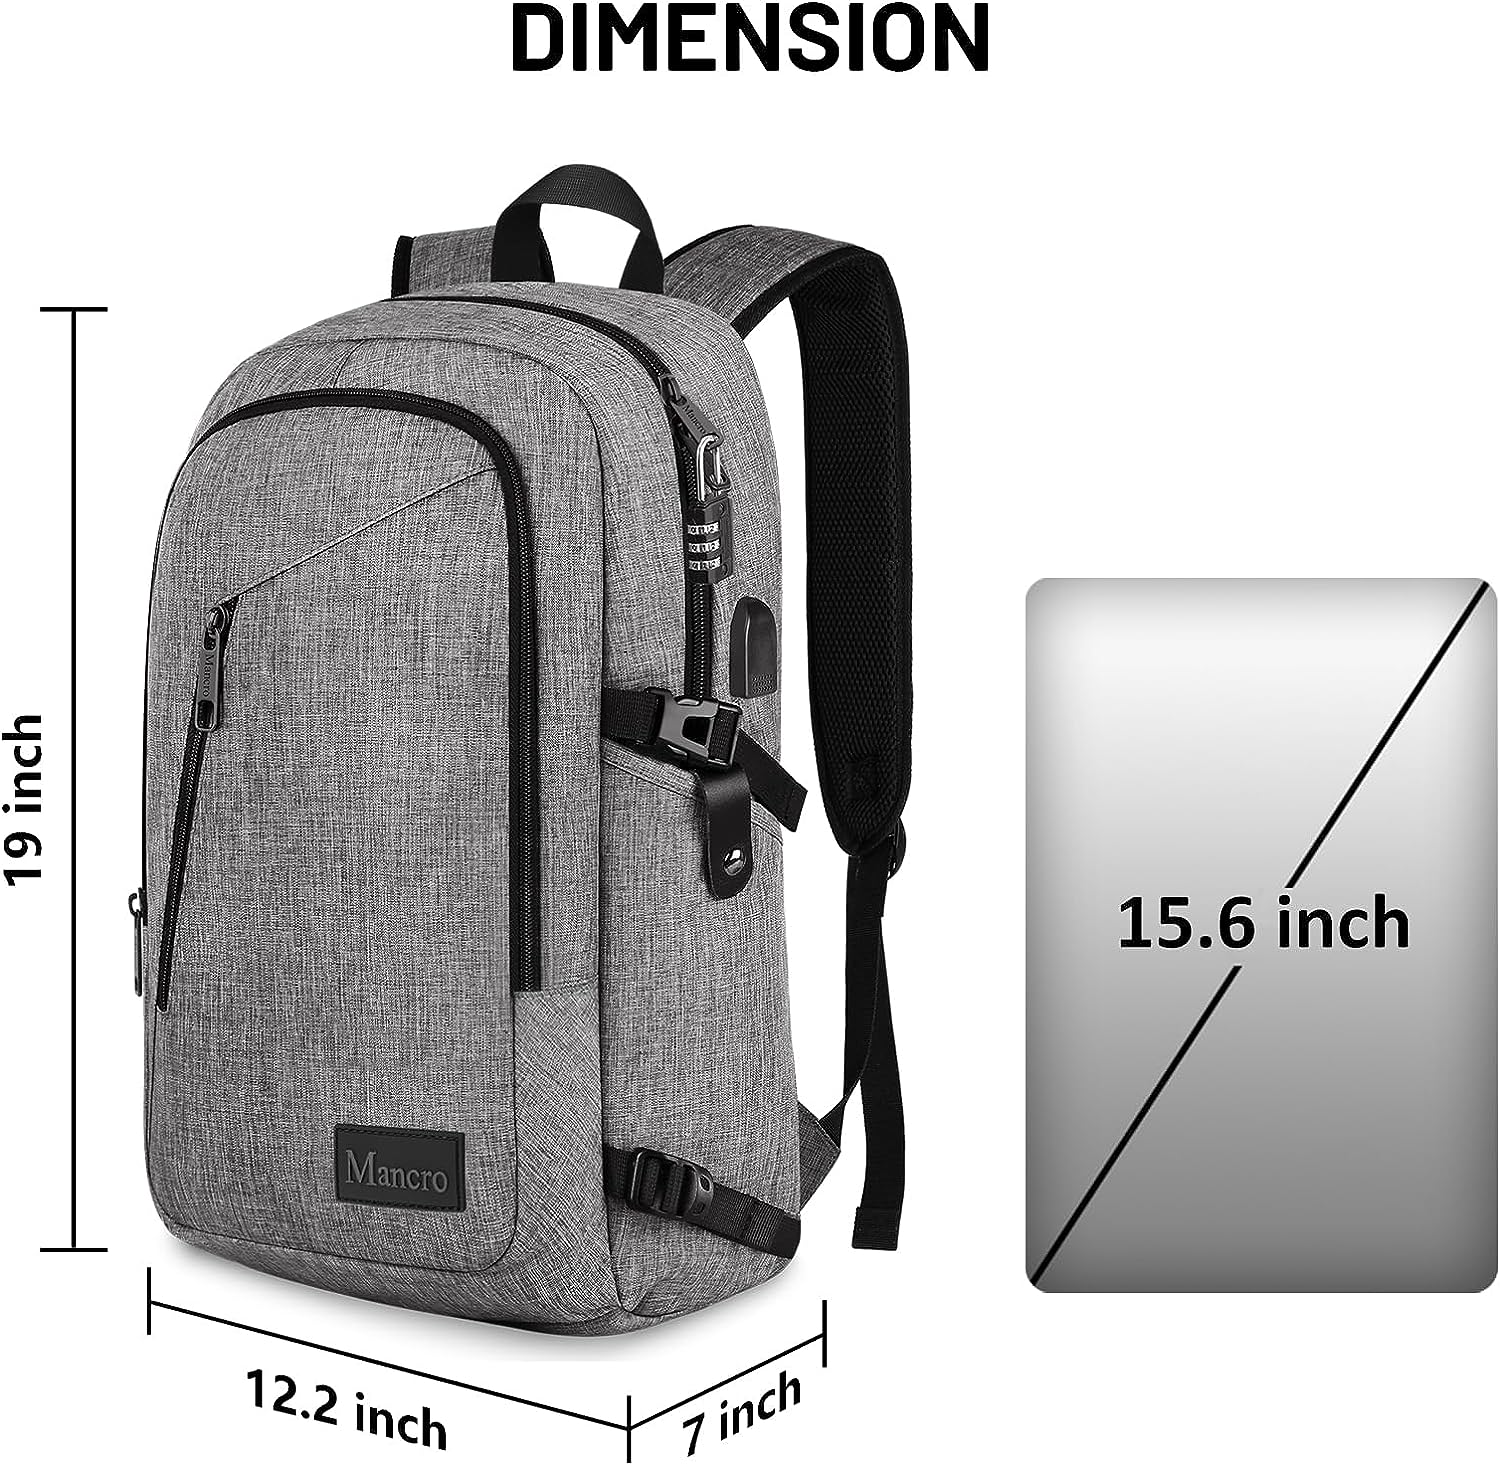 mancro business water resistant polyester laptop backpack with usb charging port and lock fits under 17-inch laptop and notebook, grey - image 5 of 9